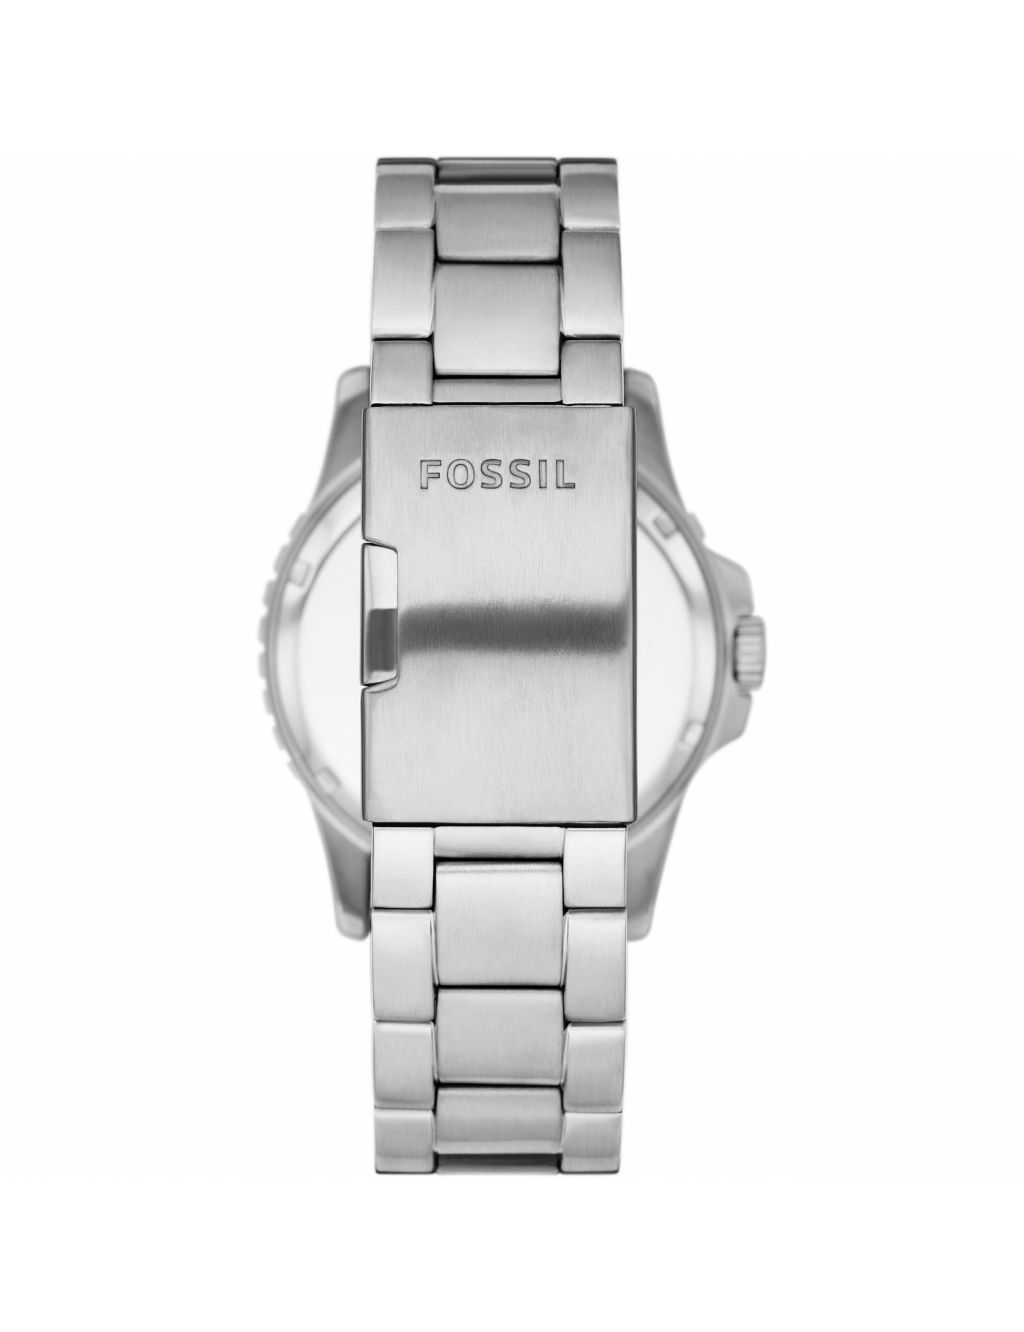 Fossil Stainless Steel Watch image 2